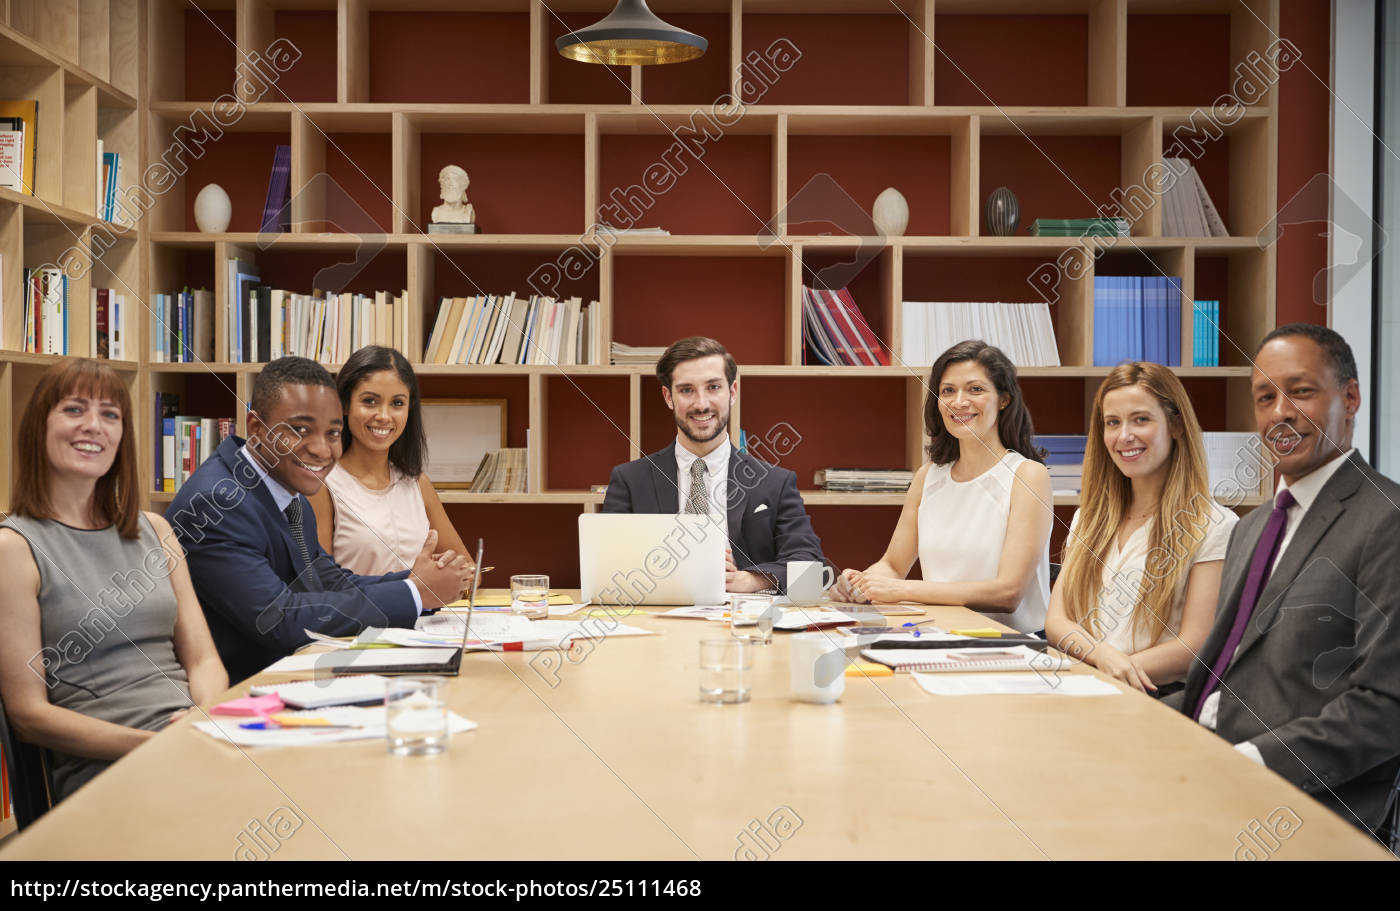 Royalty Free Photo 25111468 Medium Group Of People At A Business Boardroom Meeting